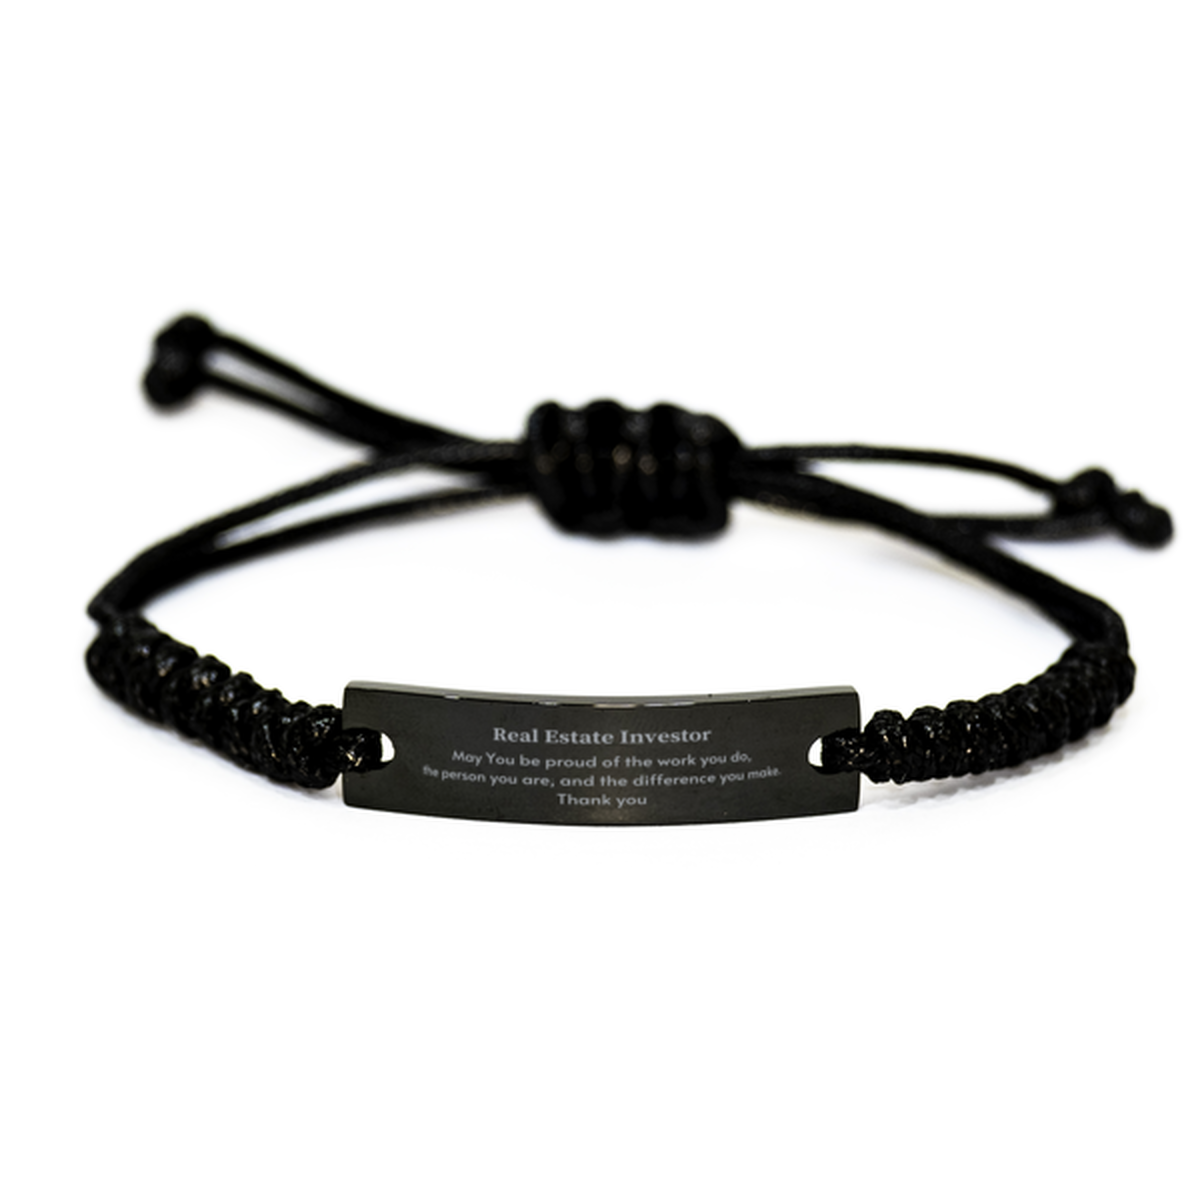 Heartwarming Black Rope Bracelet Retirement Coworkers Gifts for Real Estate Investor, Real Estate Investor May You be proud of the work you do, the person you are Gifts for Boss Men Women Friends